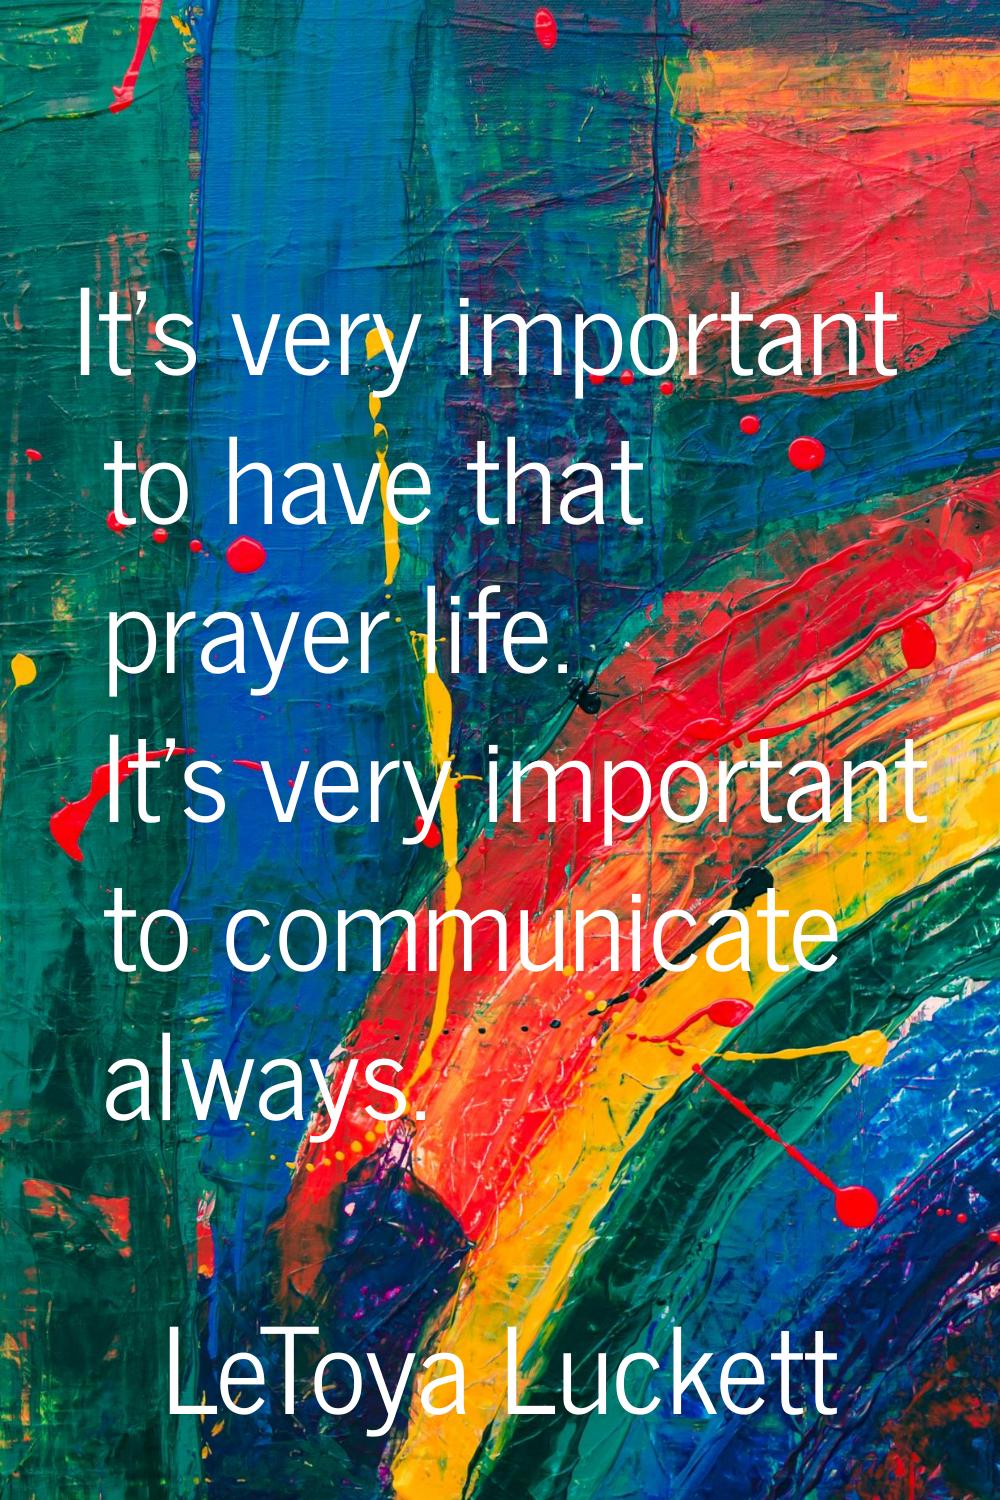 It's very important to have that prayer life. It's very important to communicate always.